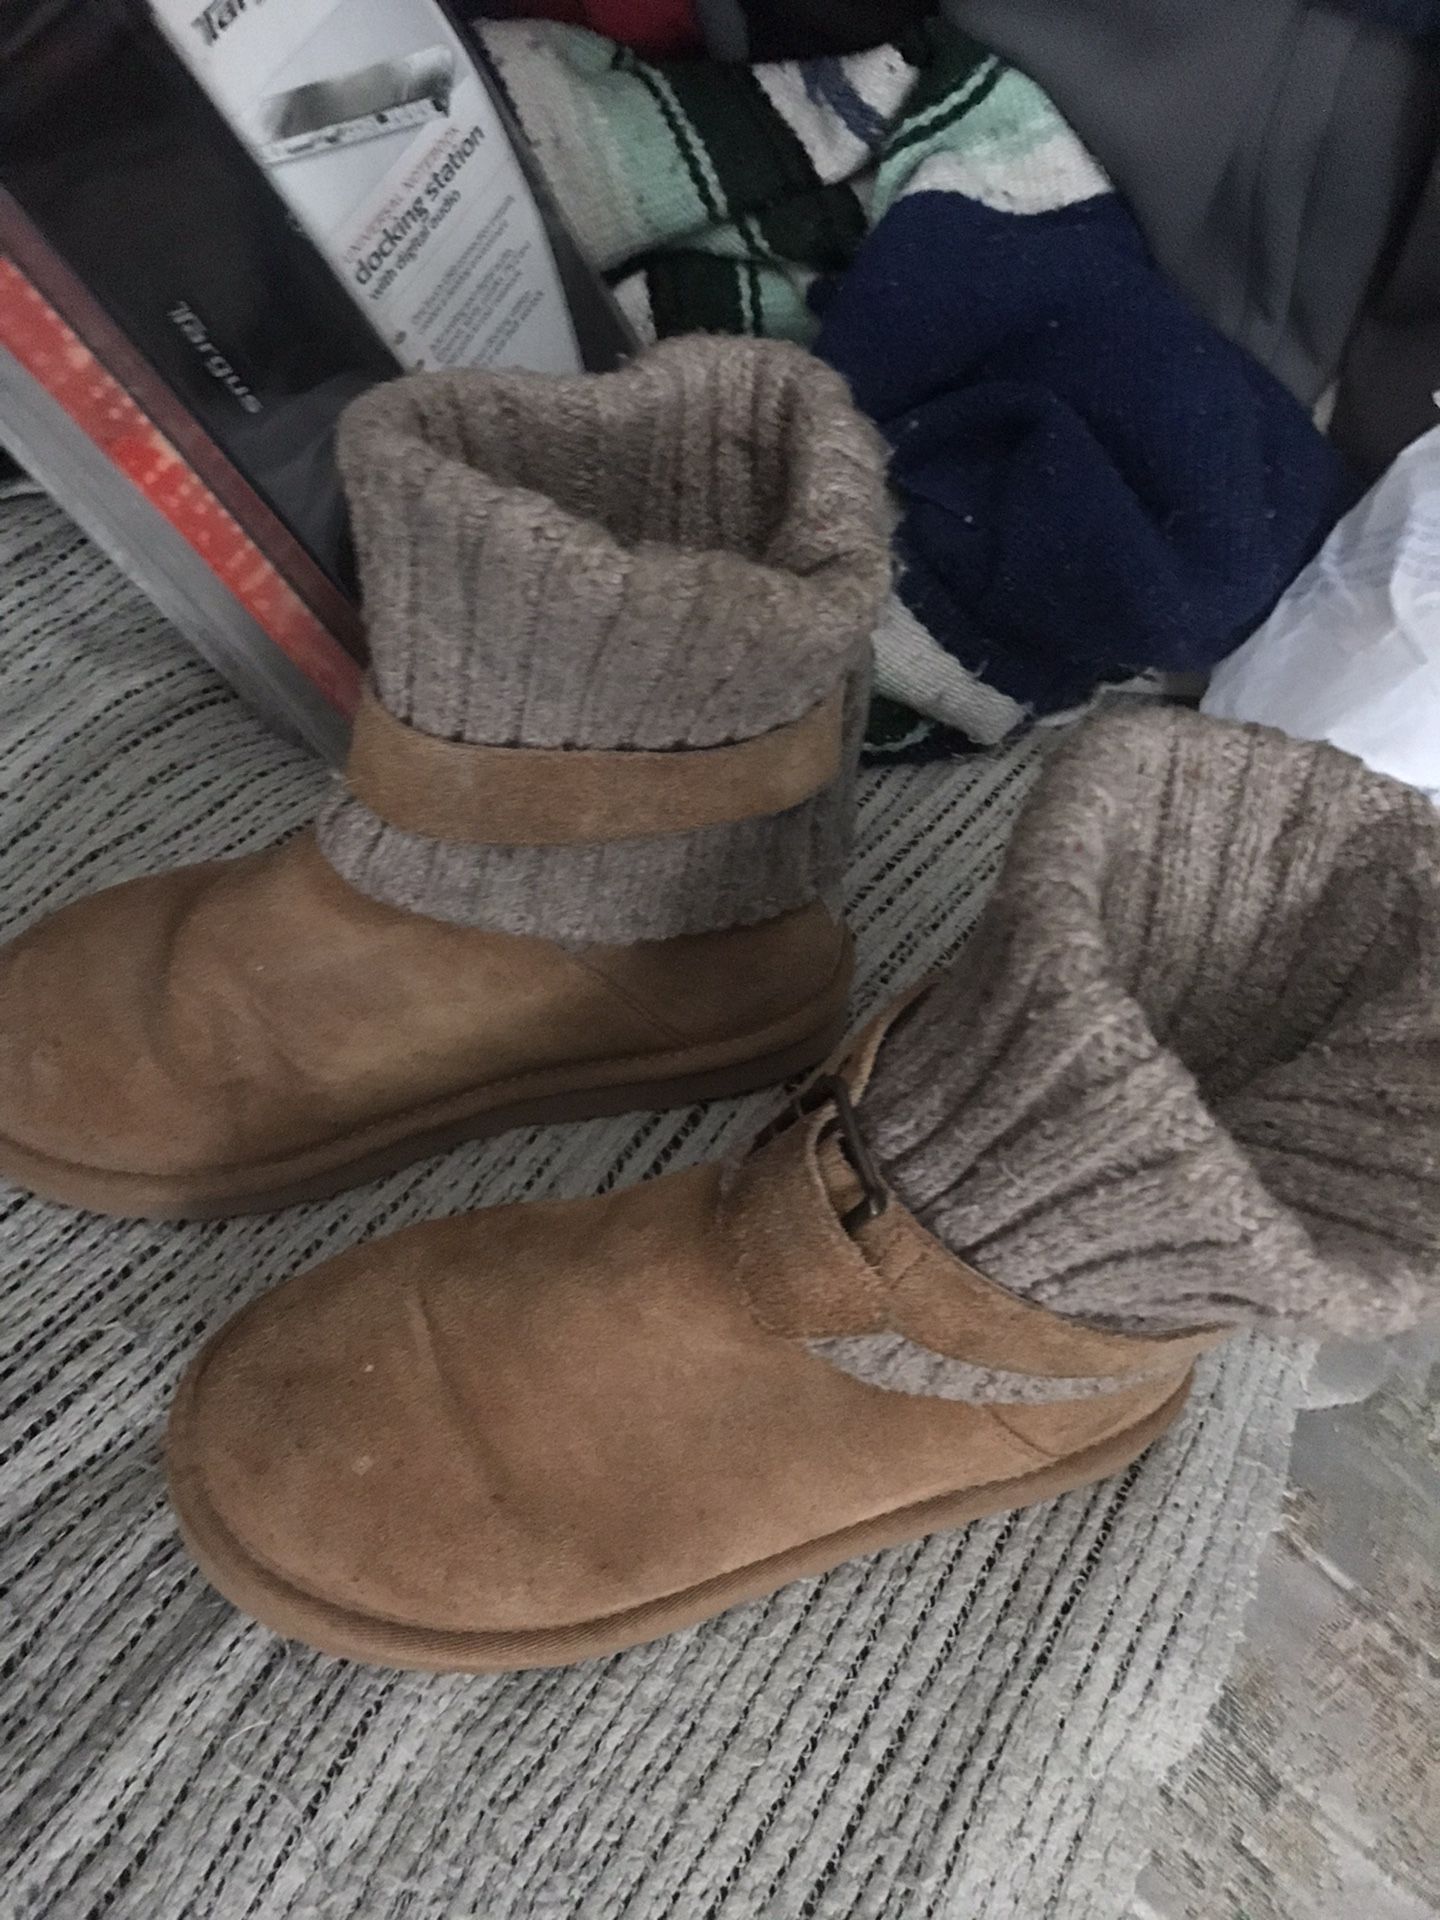 Lnew Very Nice Australian Ugg Boots See Other Pictures Only $50